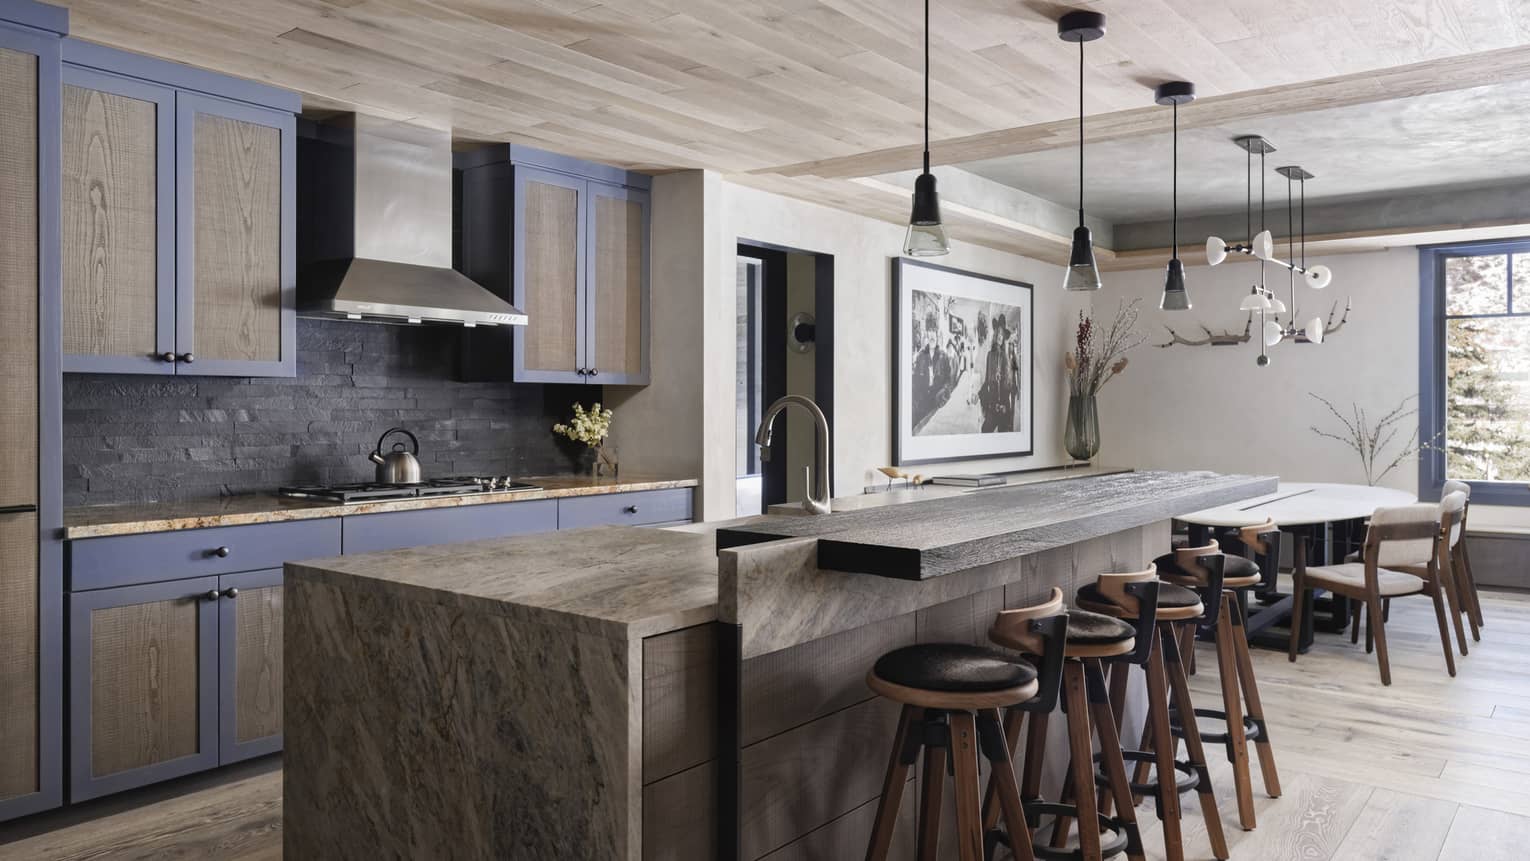 Residence kitchen with grey wood cabinetry, long centre island with leather barstools, stovetop range, dining table on right